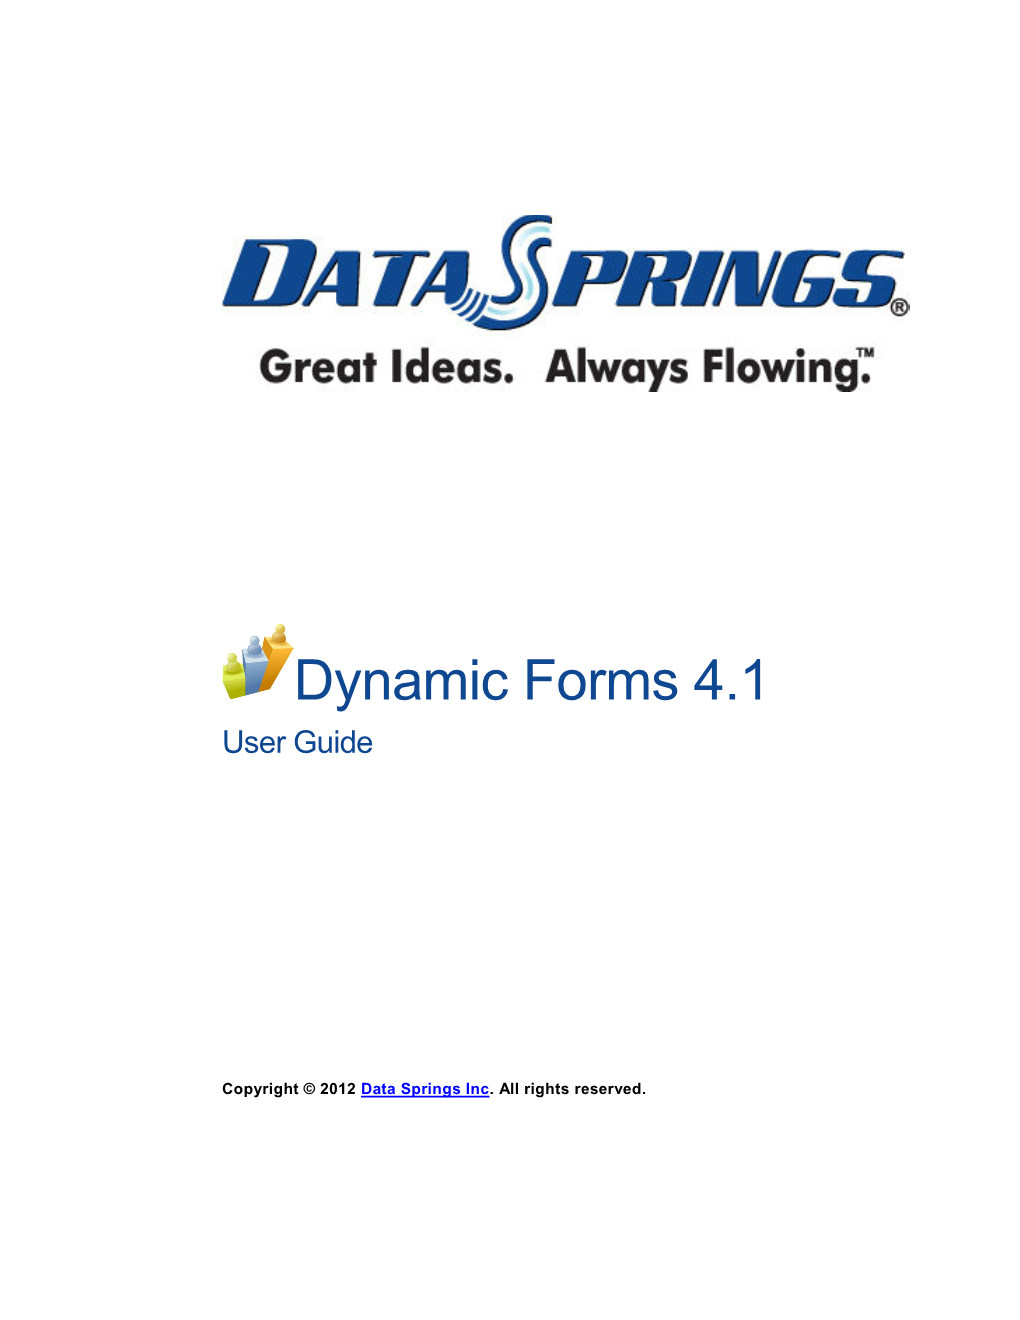 Dynamic Forms 4.1 User Guide